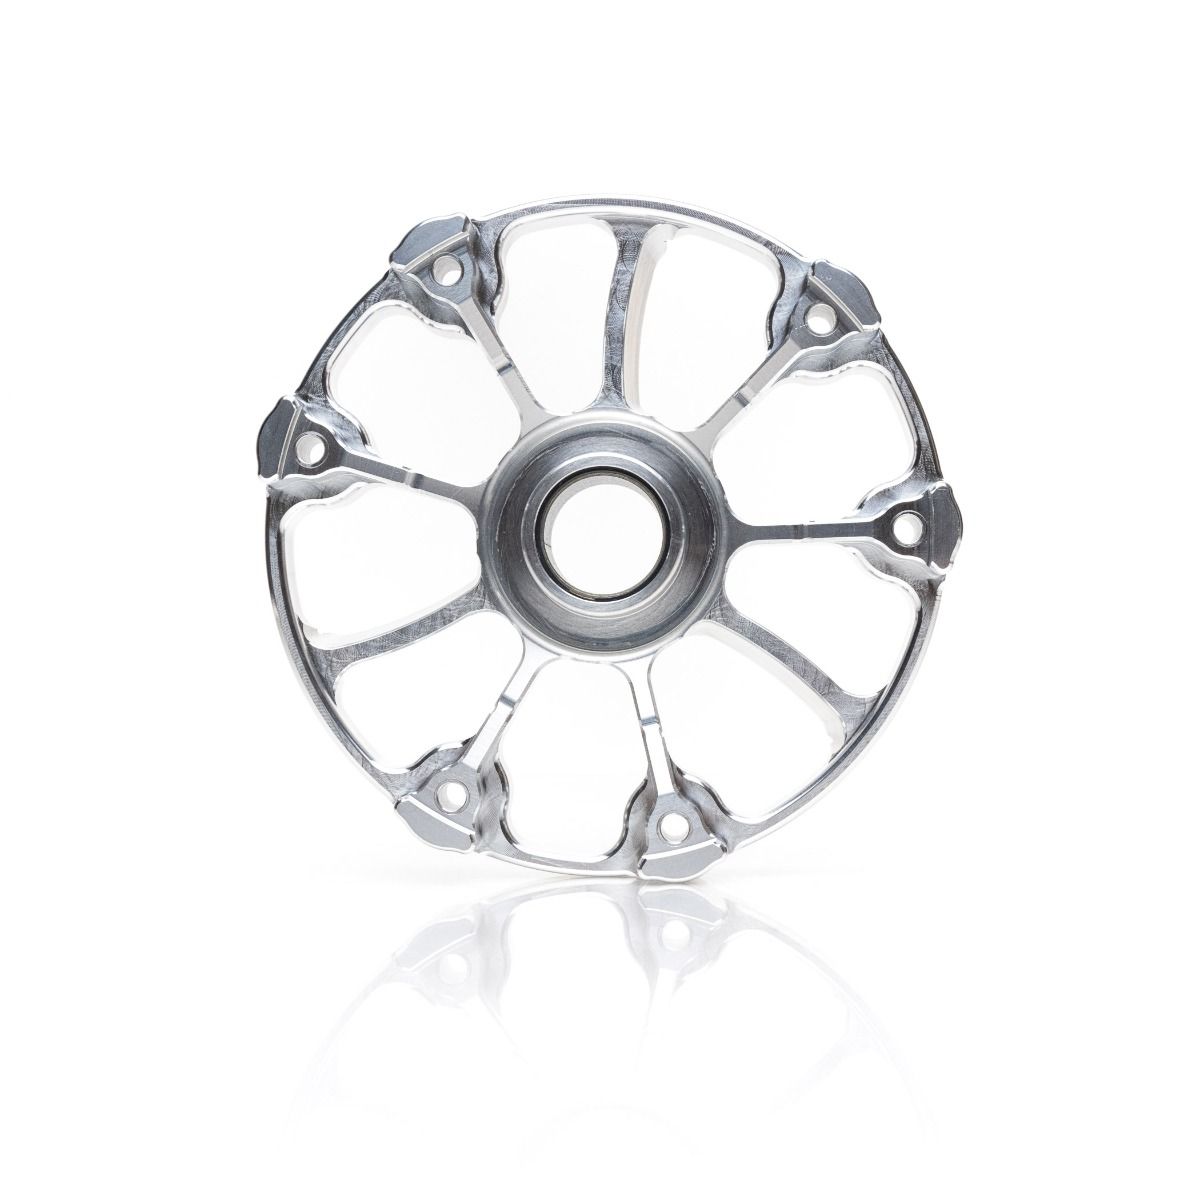 Cyclone Clutch Cover - Clutch & Belt Cooling w/ Billet Fan Blades - Replaces stock Polaris P85 clutch cover - Click Image to Close